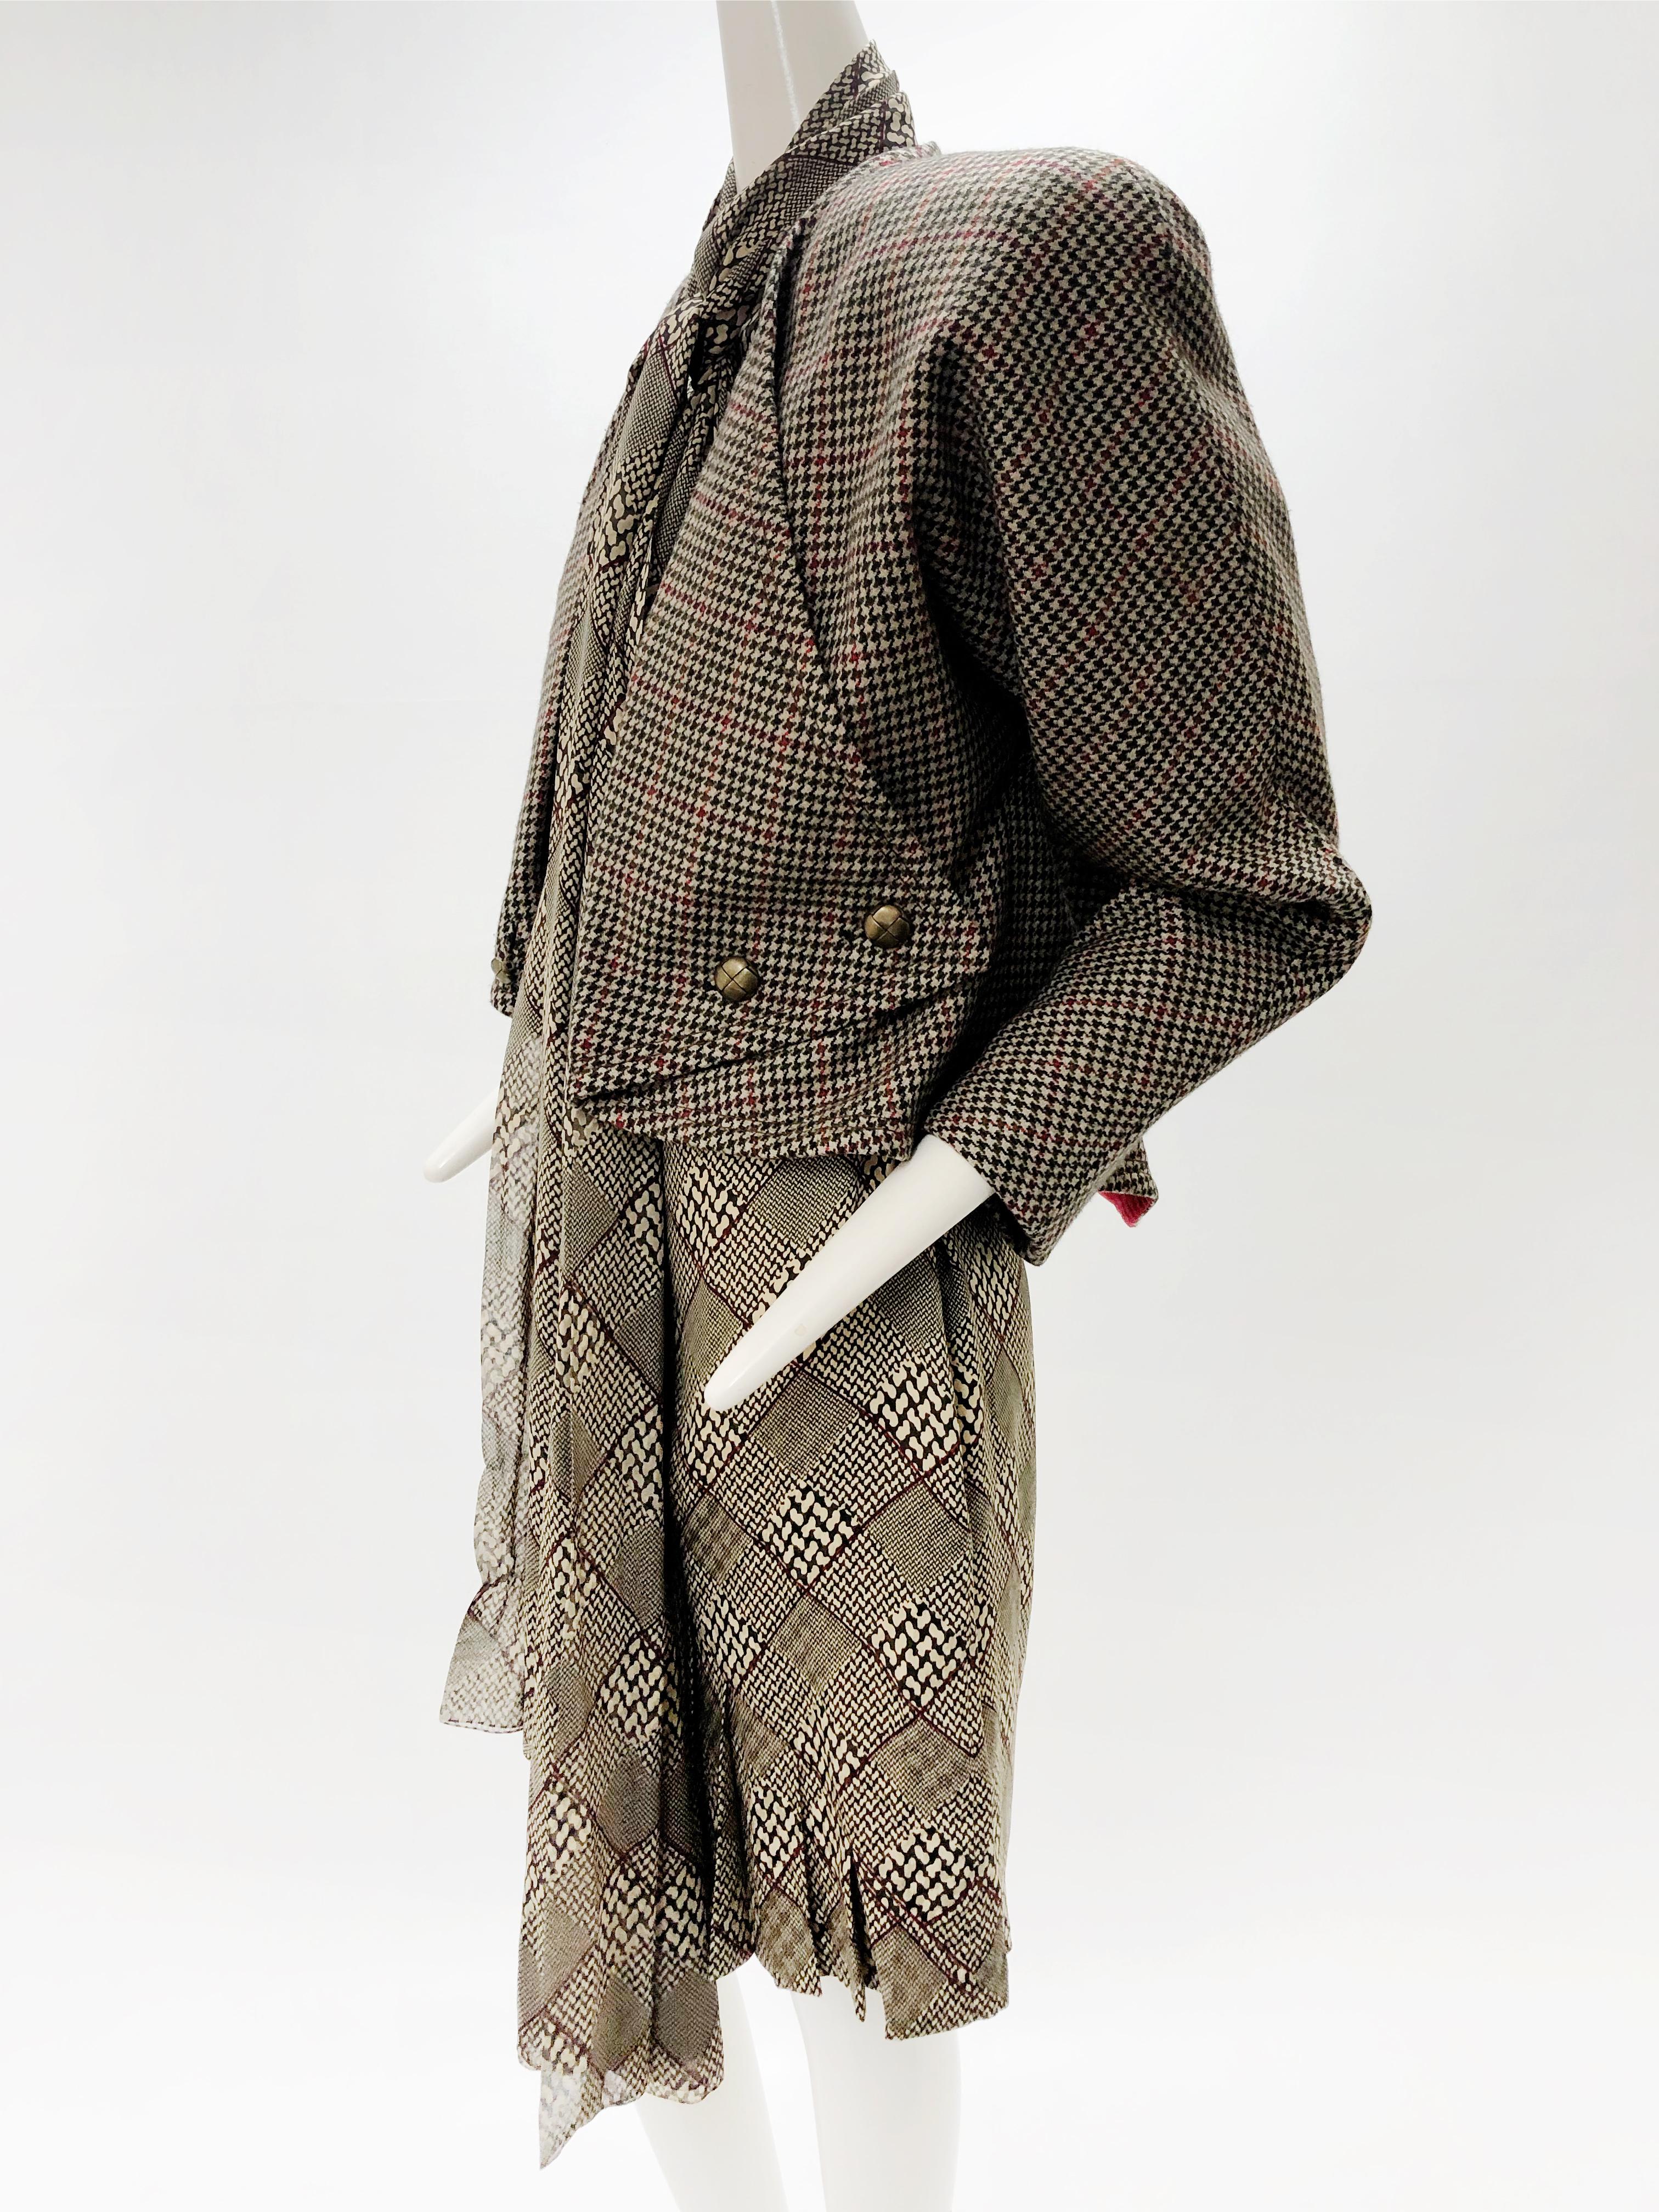 1980s Galanos Silk Dress in a Hounds Tooth Plaid W/ Matching Wool Jacket & Scarf For Sale 8